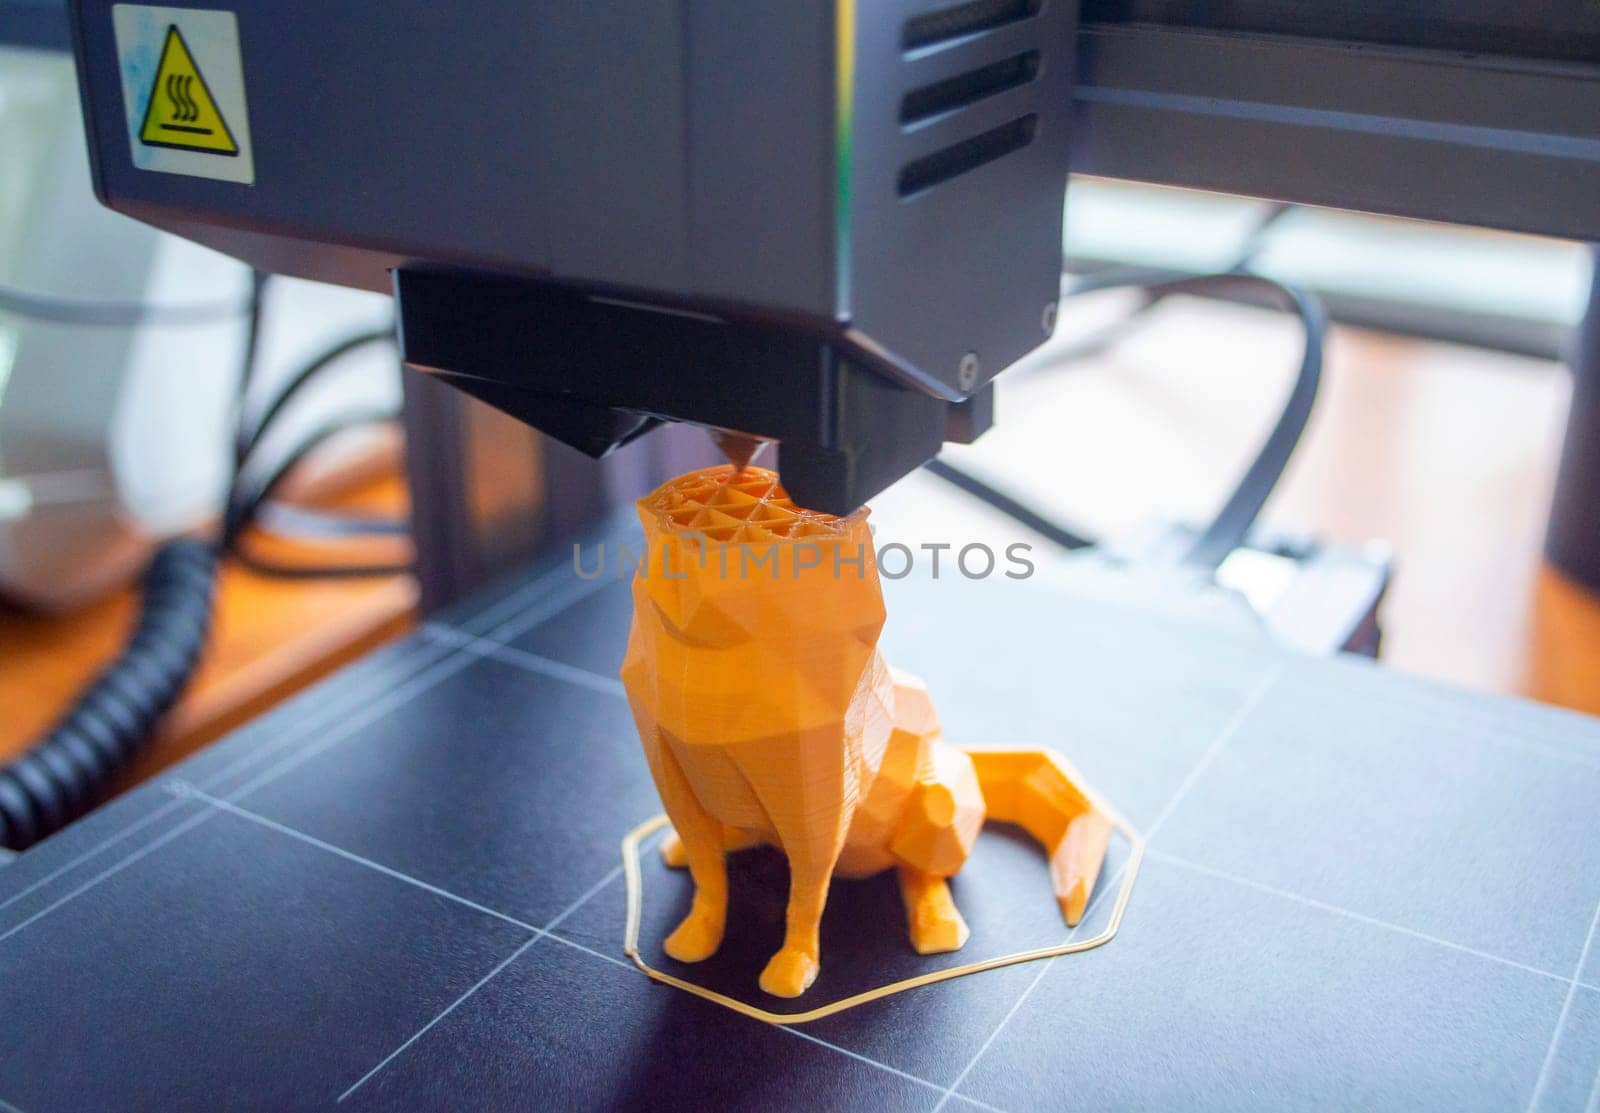 3D printer close-up. The process of working of 3D printer. 3D printer printing object from molten plastic. 3D printer creating model by flowing liquid plastic from an extruder. Printing technology